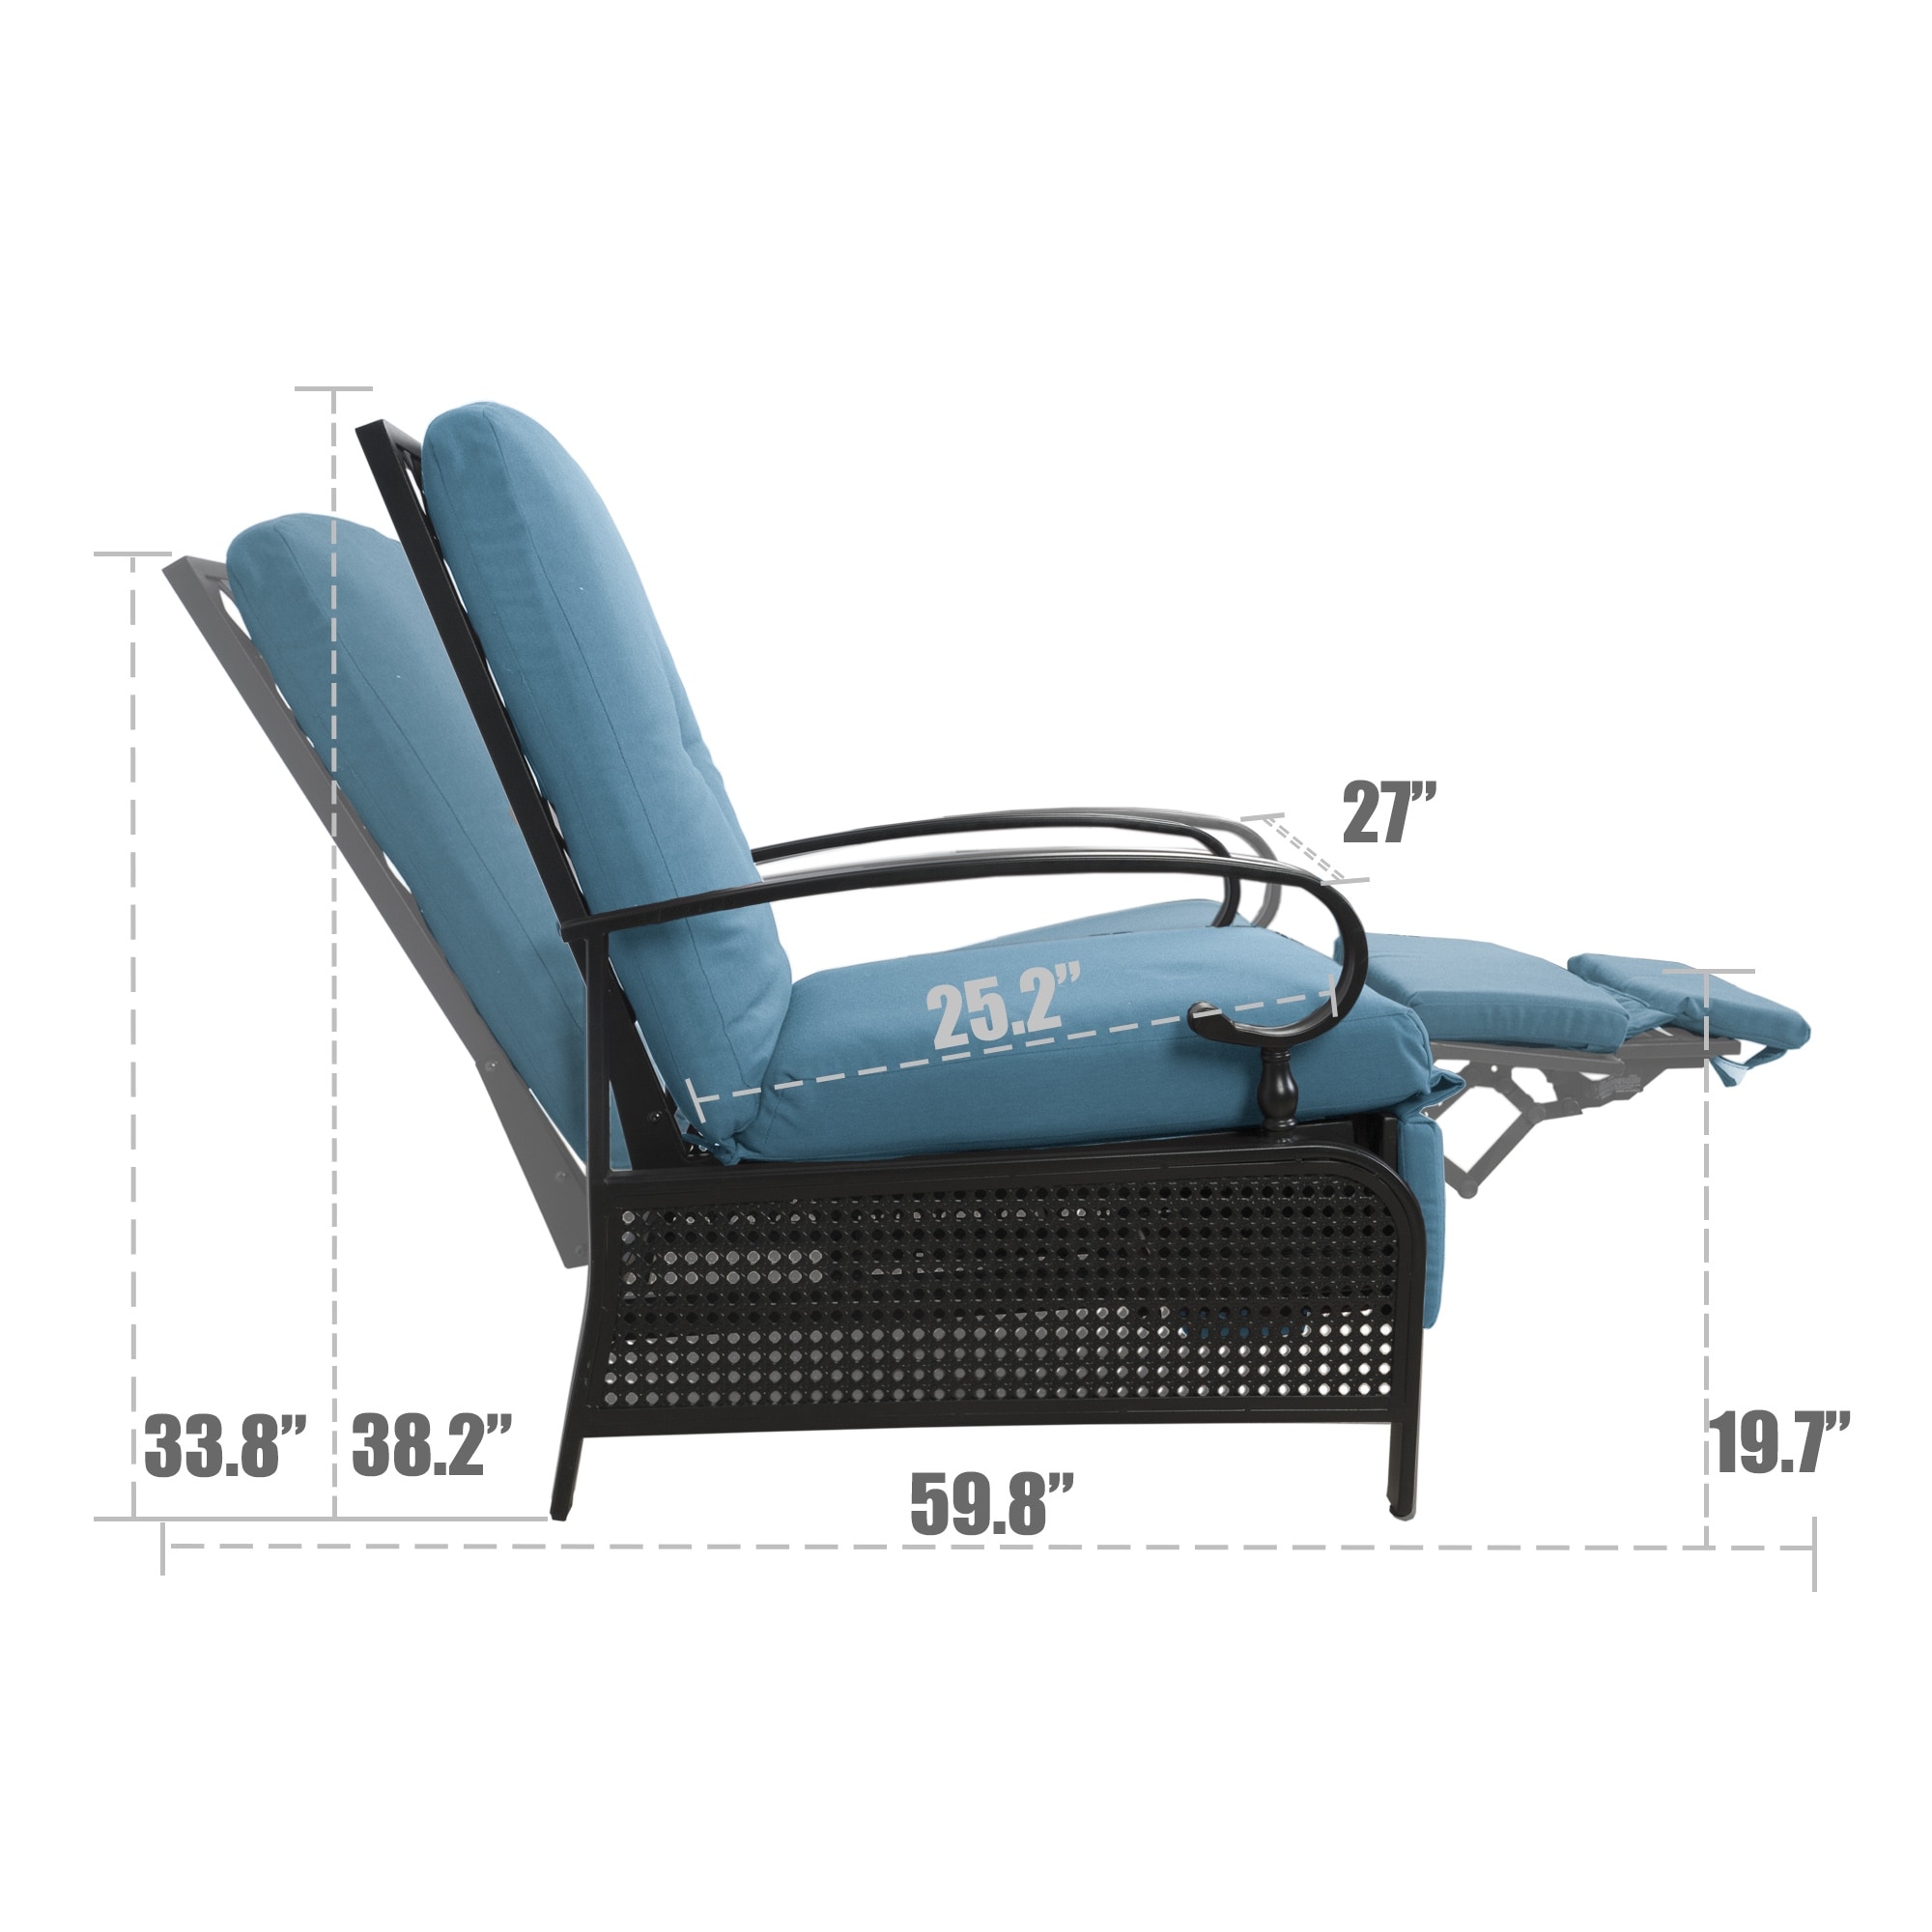 https://ak1.ostkcdn.com/images/products/is/images/direct/74a61d5344a8eabe4c26042ee35c6cec487ed760/Kozyard-Adjustable-Patio-Reclining-Lounge-Chair-with-Strong-Extendable-Metal-Frame-and-Removable-Cushions.jpg